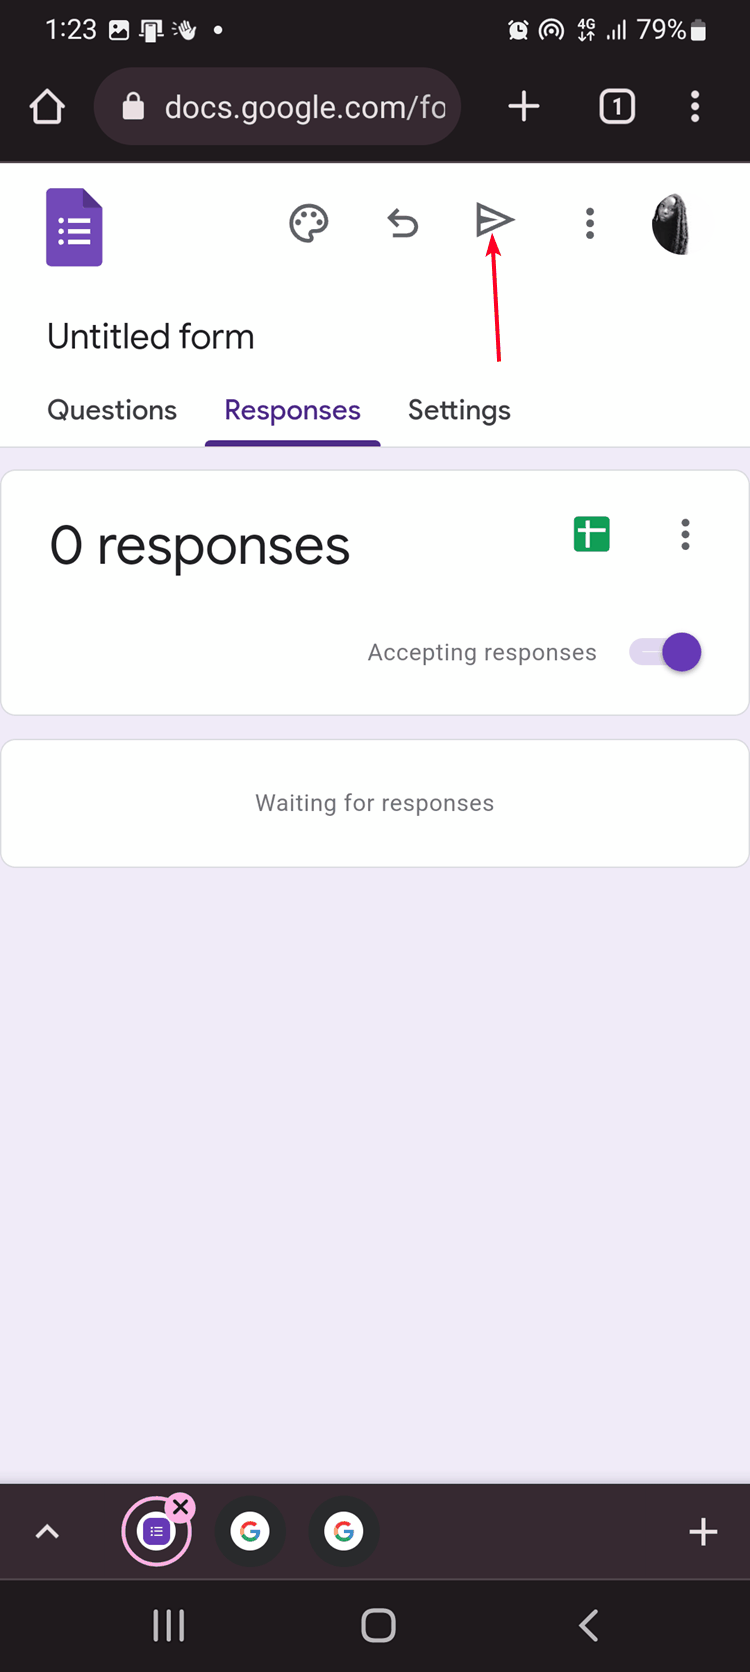 Icon for sharing Google Forms survey on mobile version